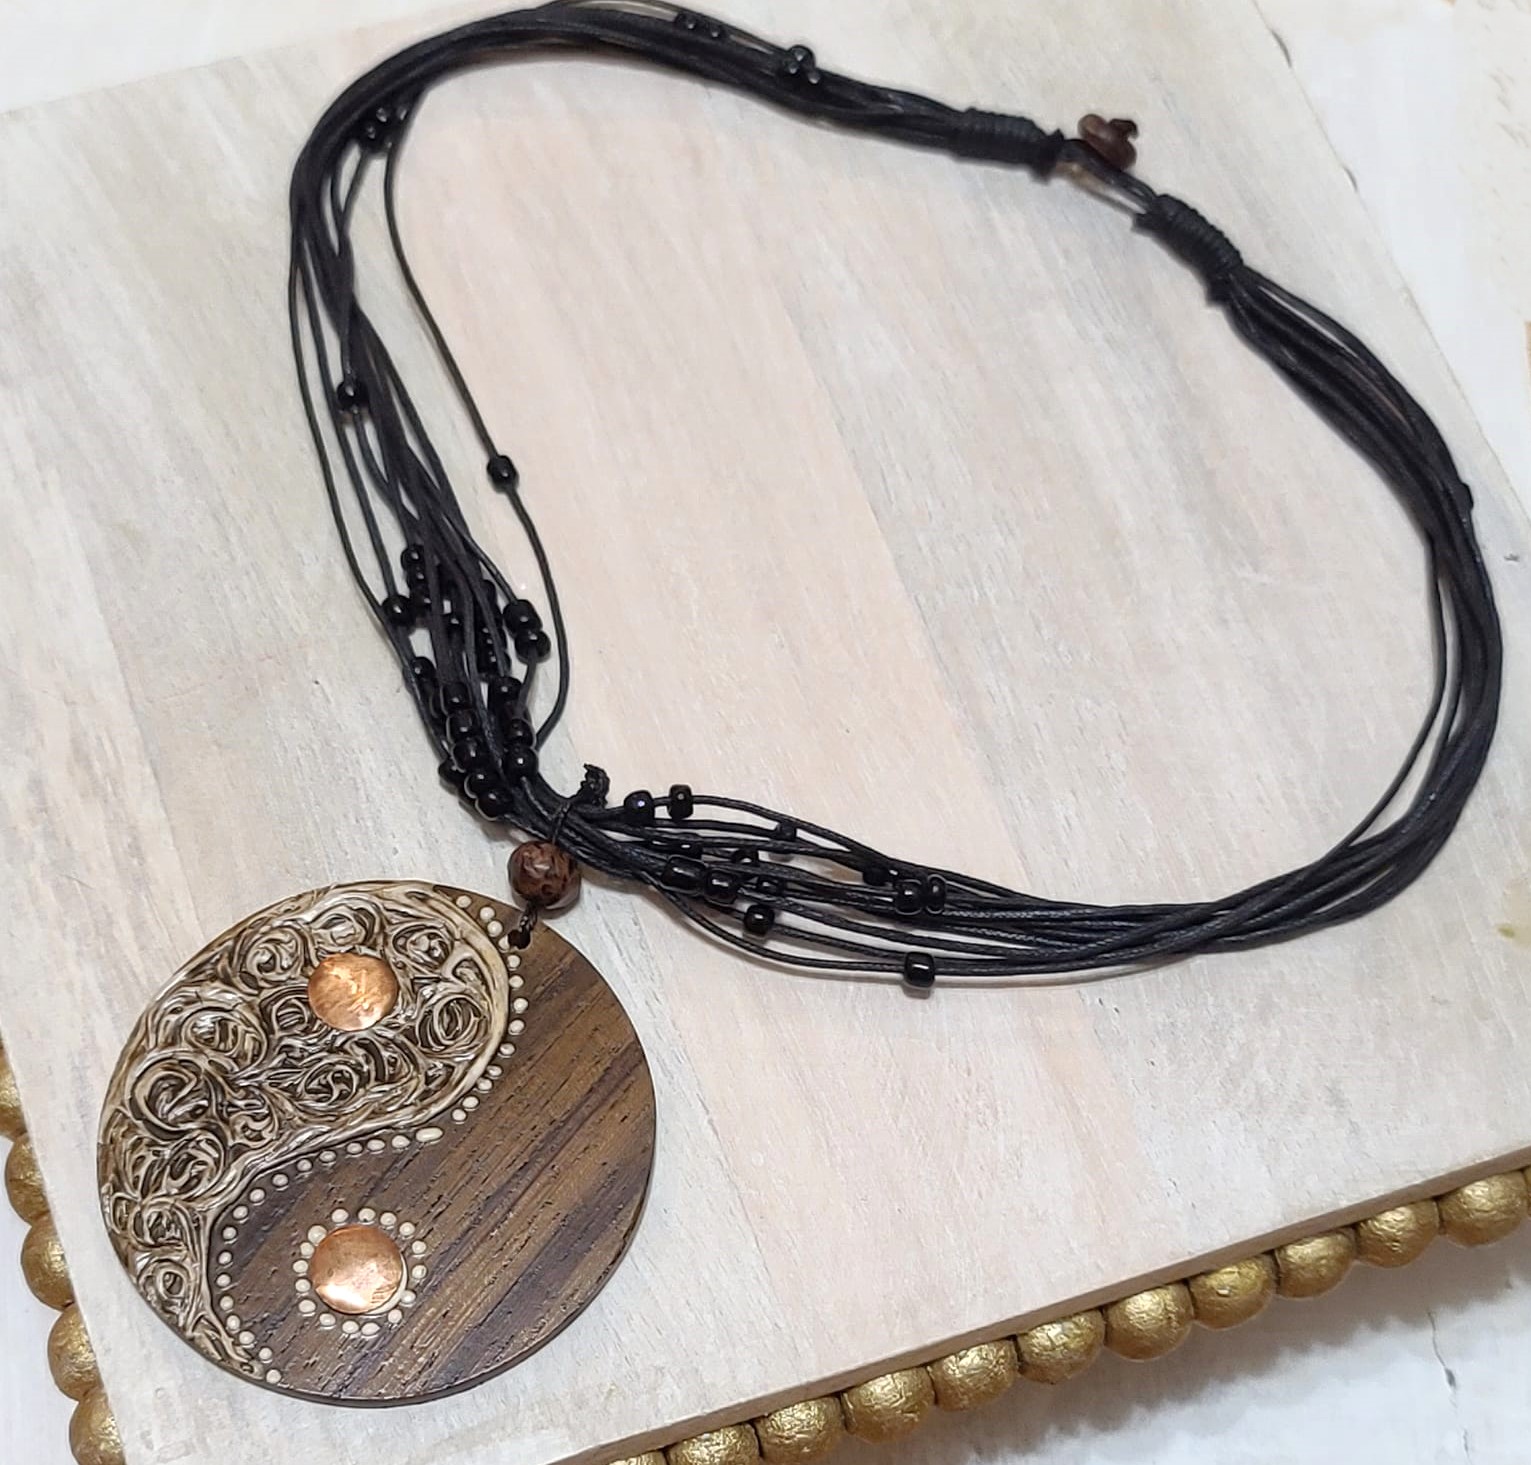 Copper and Wood Necklace Round Pendant